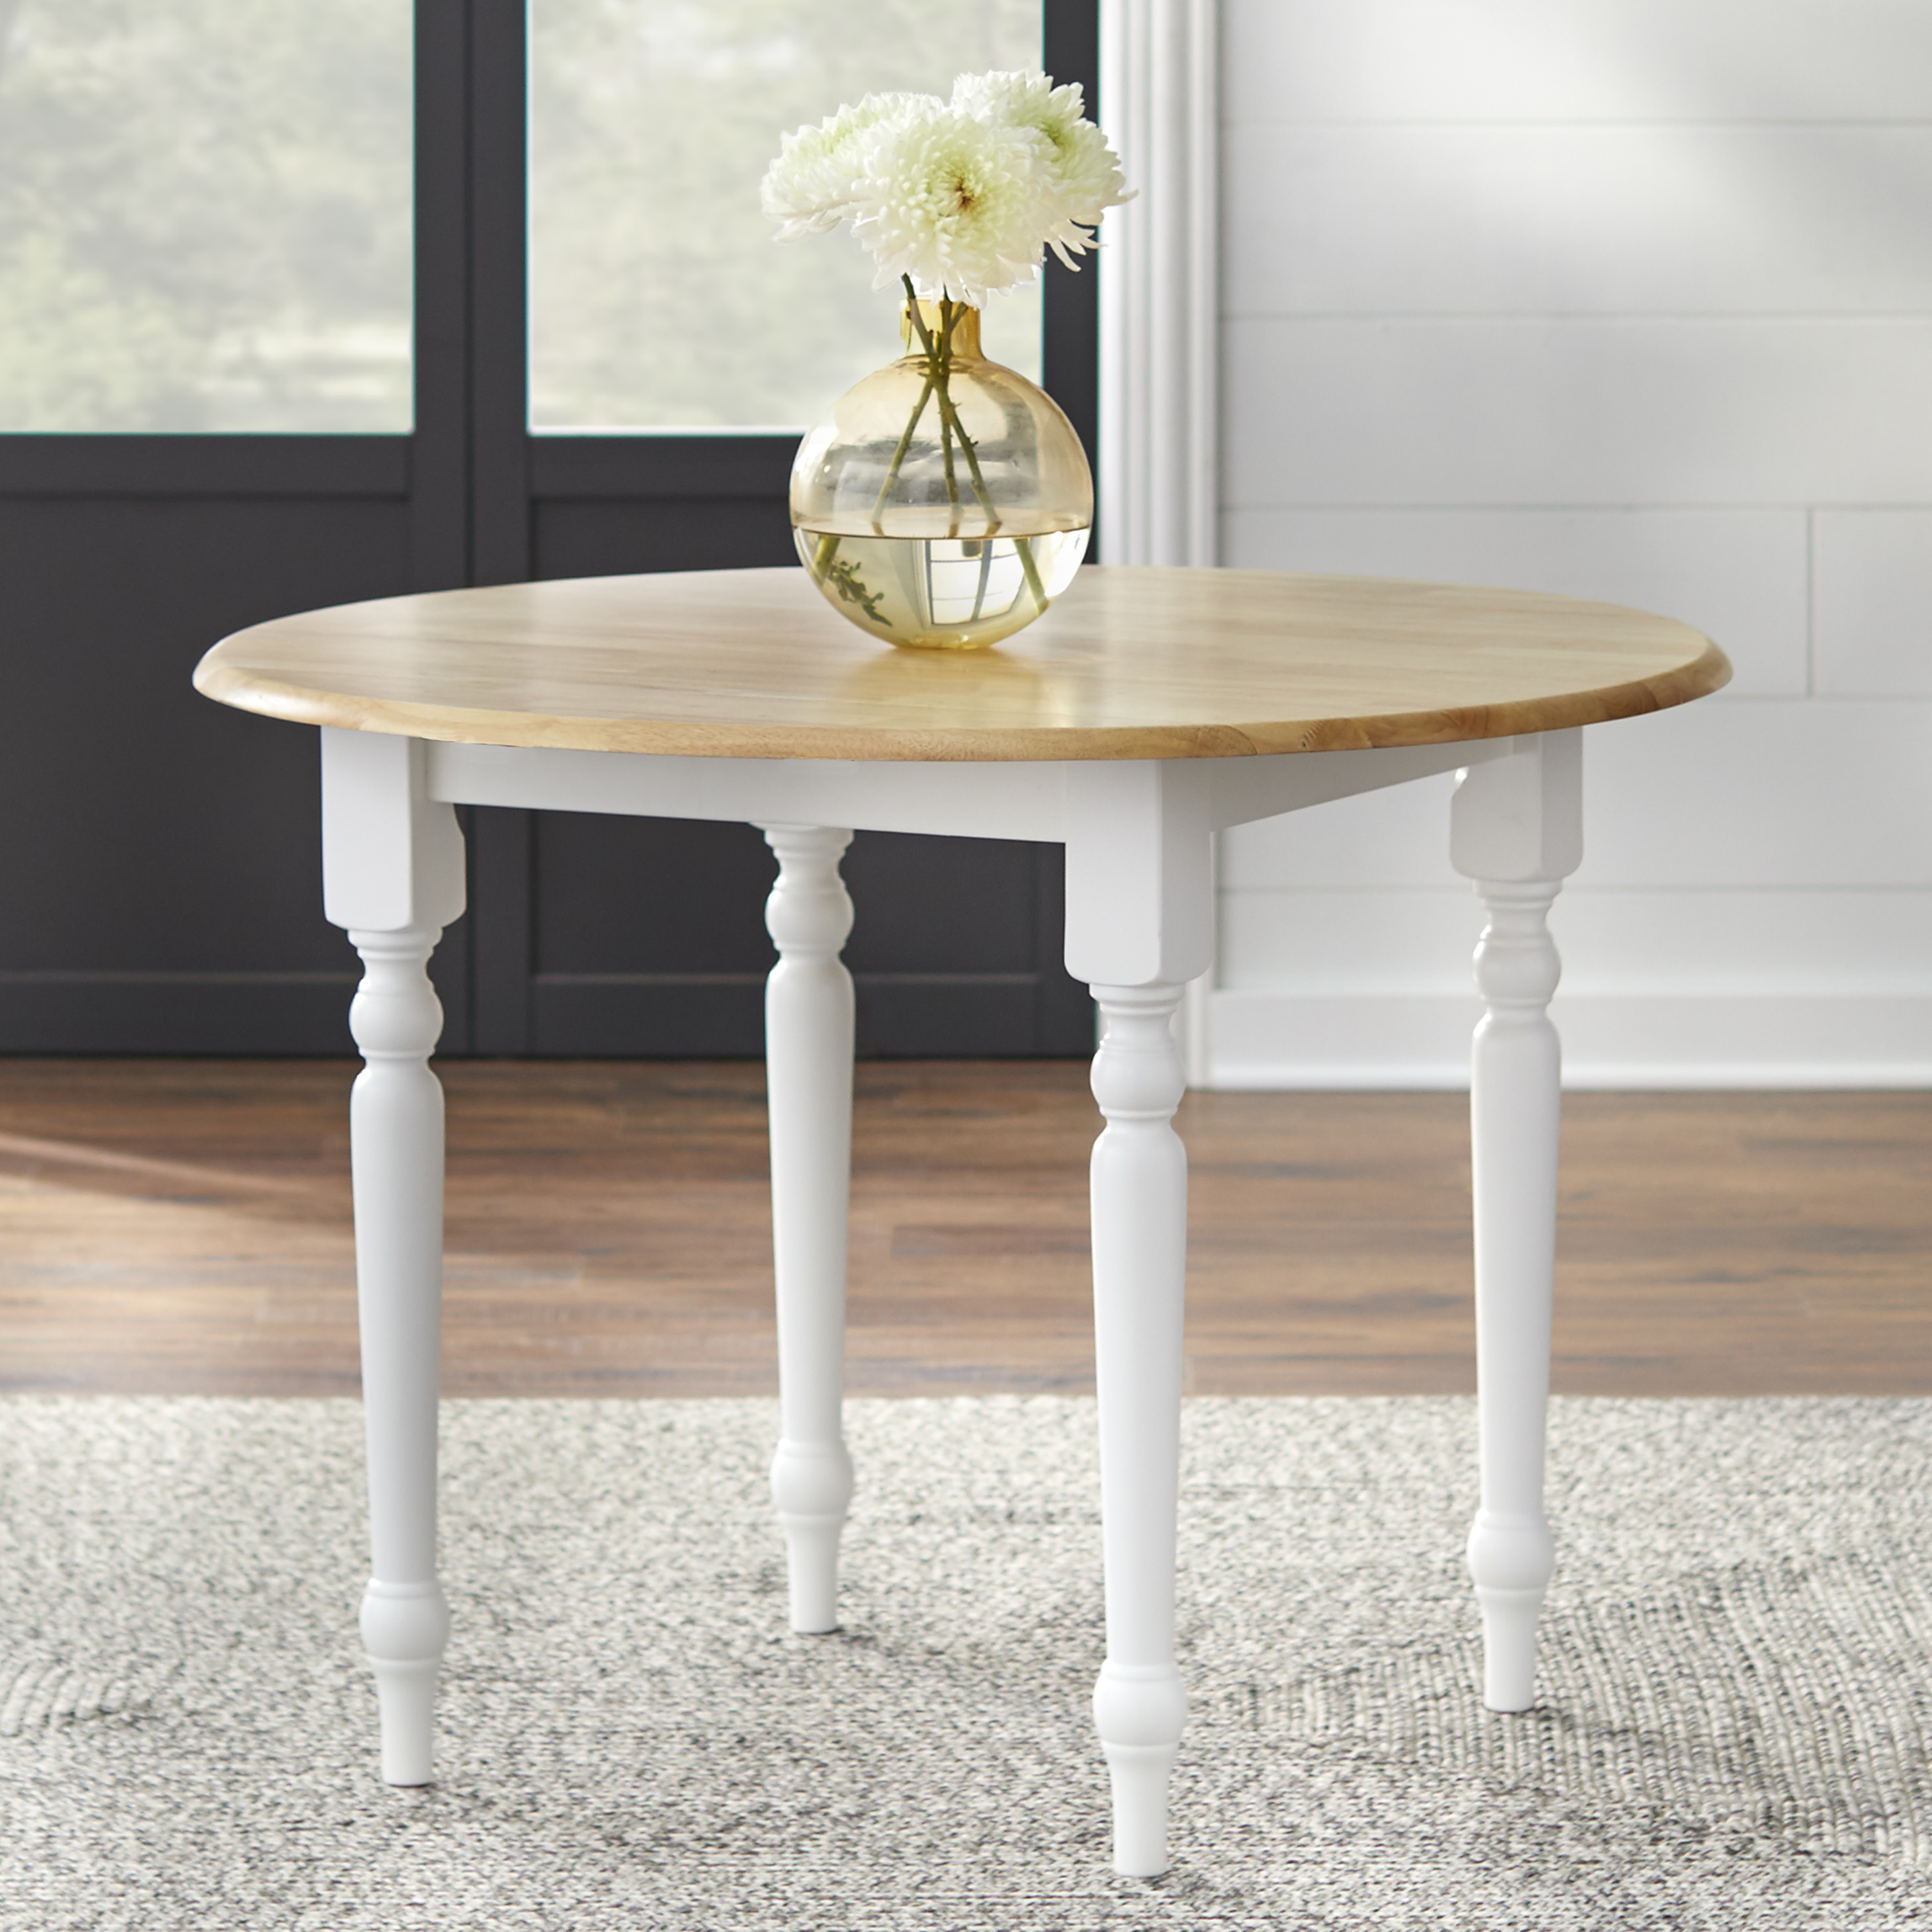 TMS Round Drop-Leaf Dining Table, White/Natural - image 1 of 5